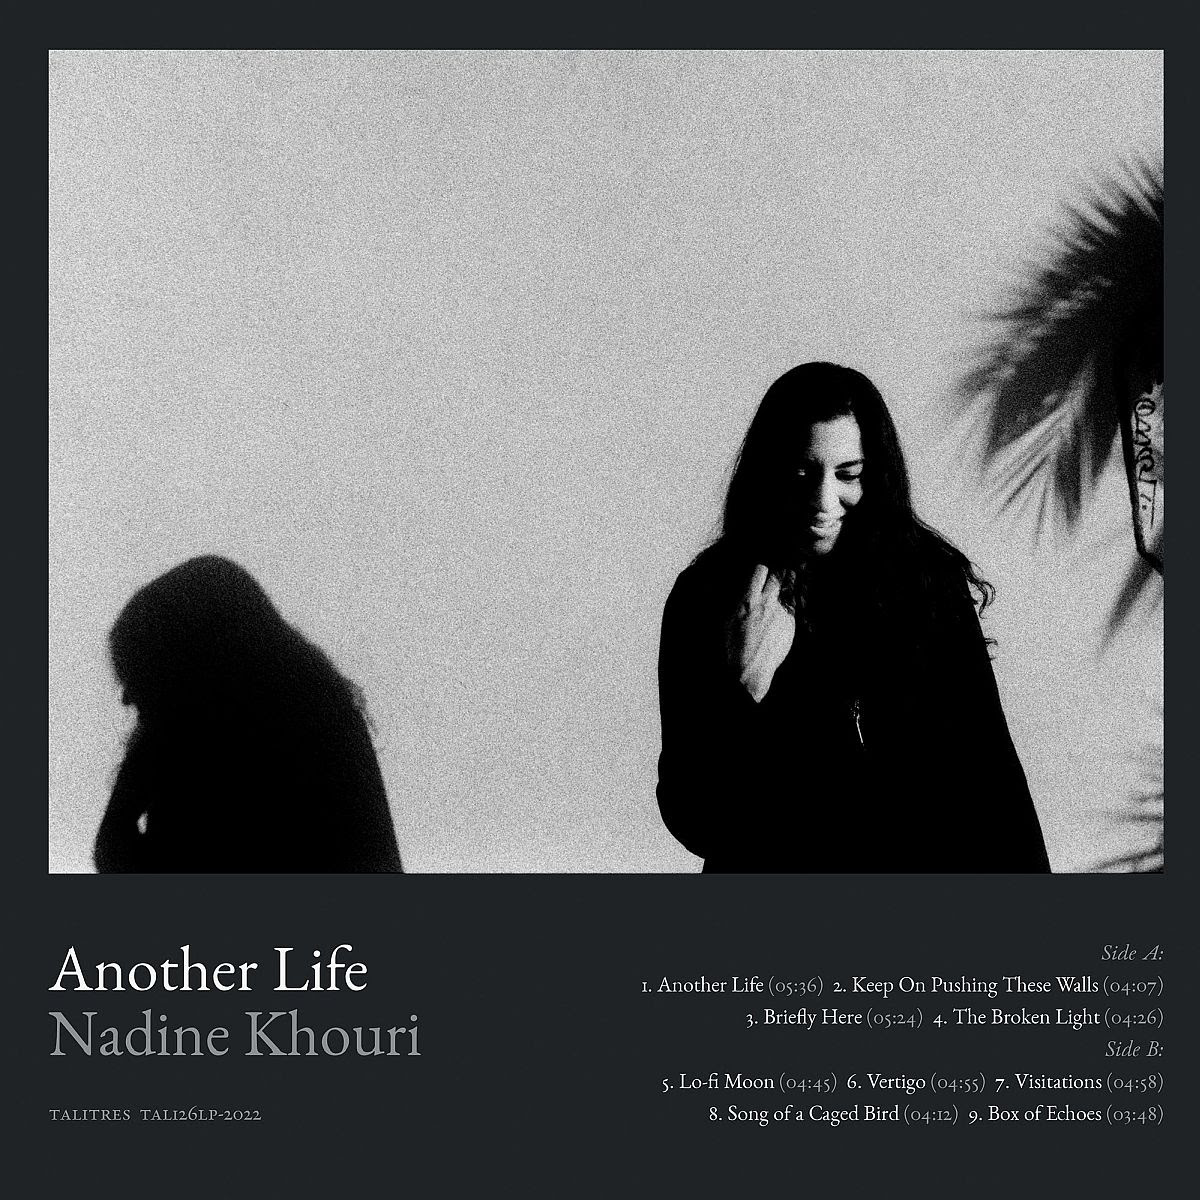 Listen to @Nadine_Khouri's 'Keep On Pushing These Walls' from her upcoming John Parish-produced album 'Another Life' brooklynvegan.com/20-new-songs-o…